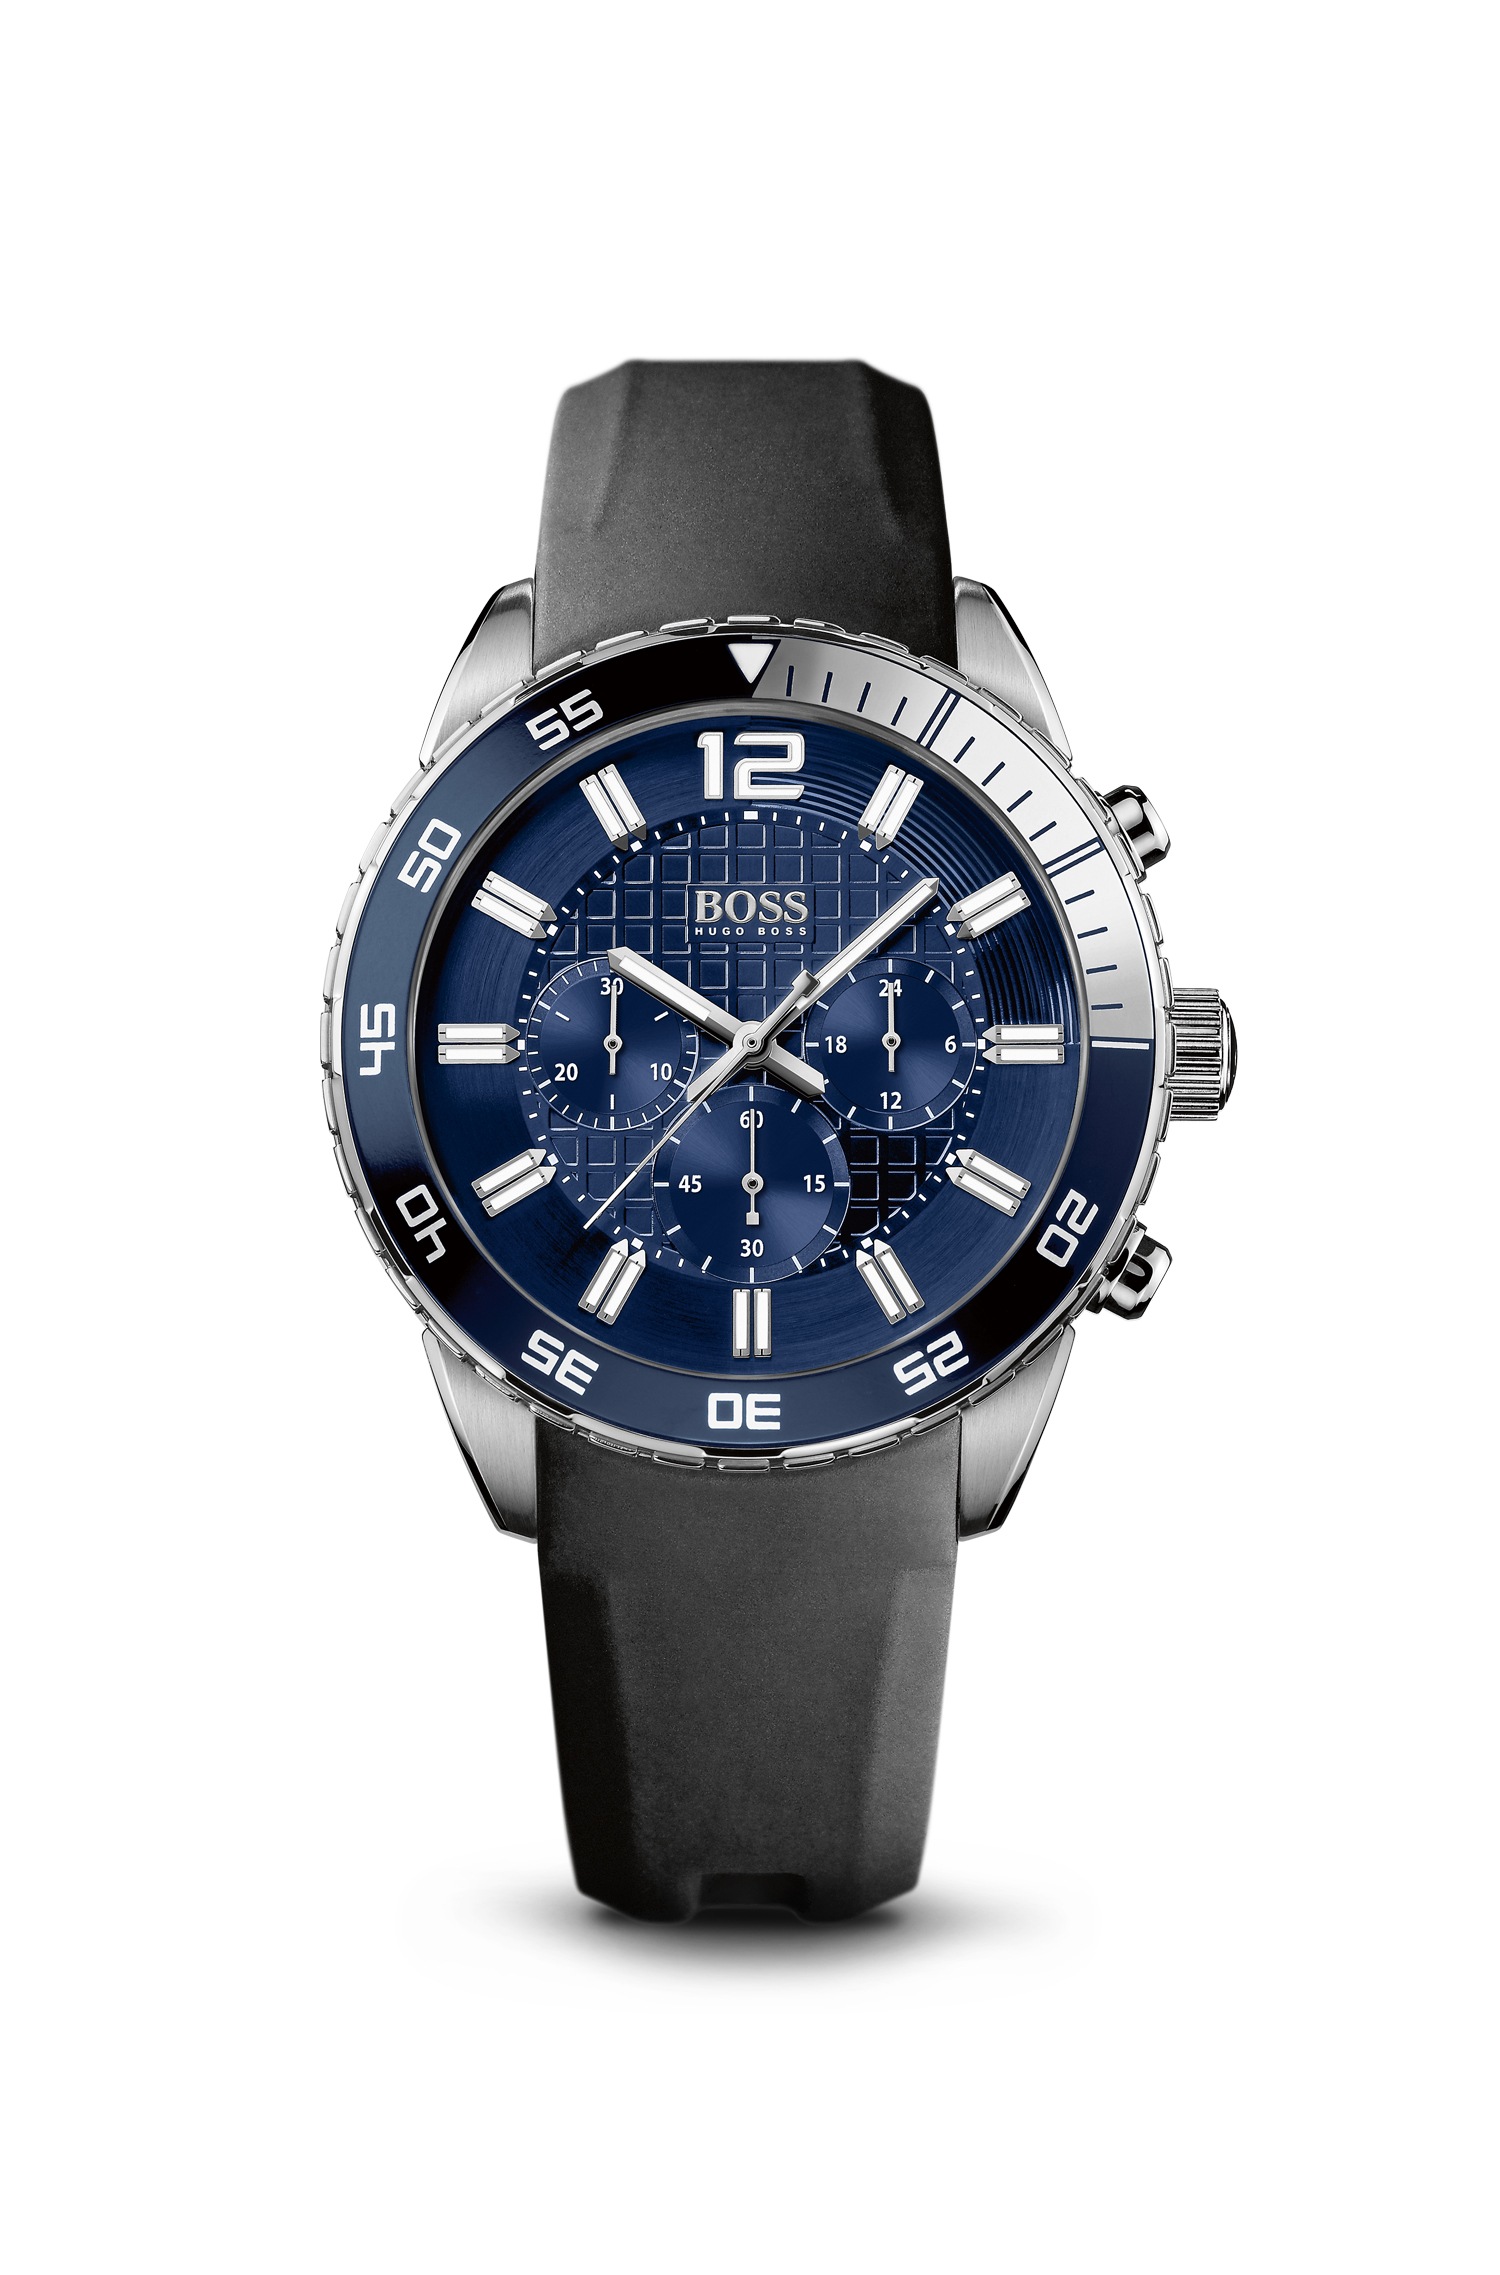 Our Watch Review on a Hugo Boss Mens 